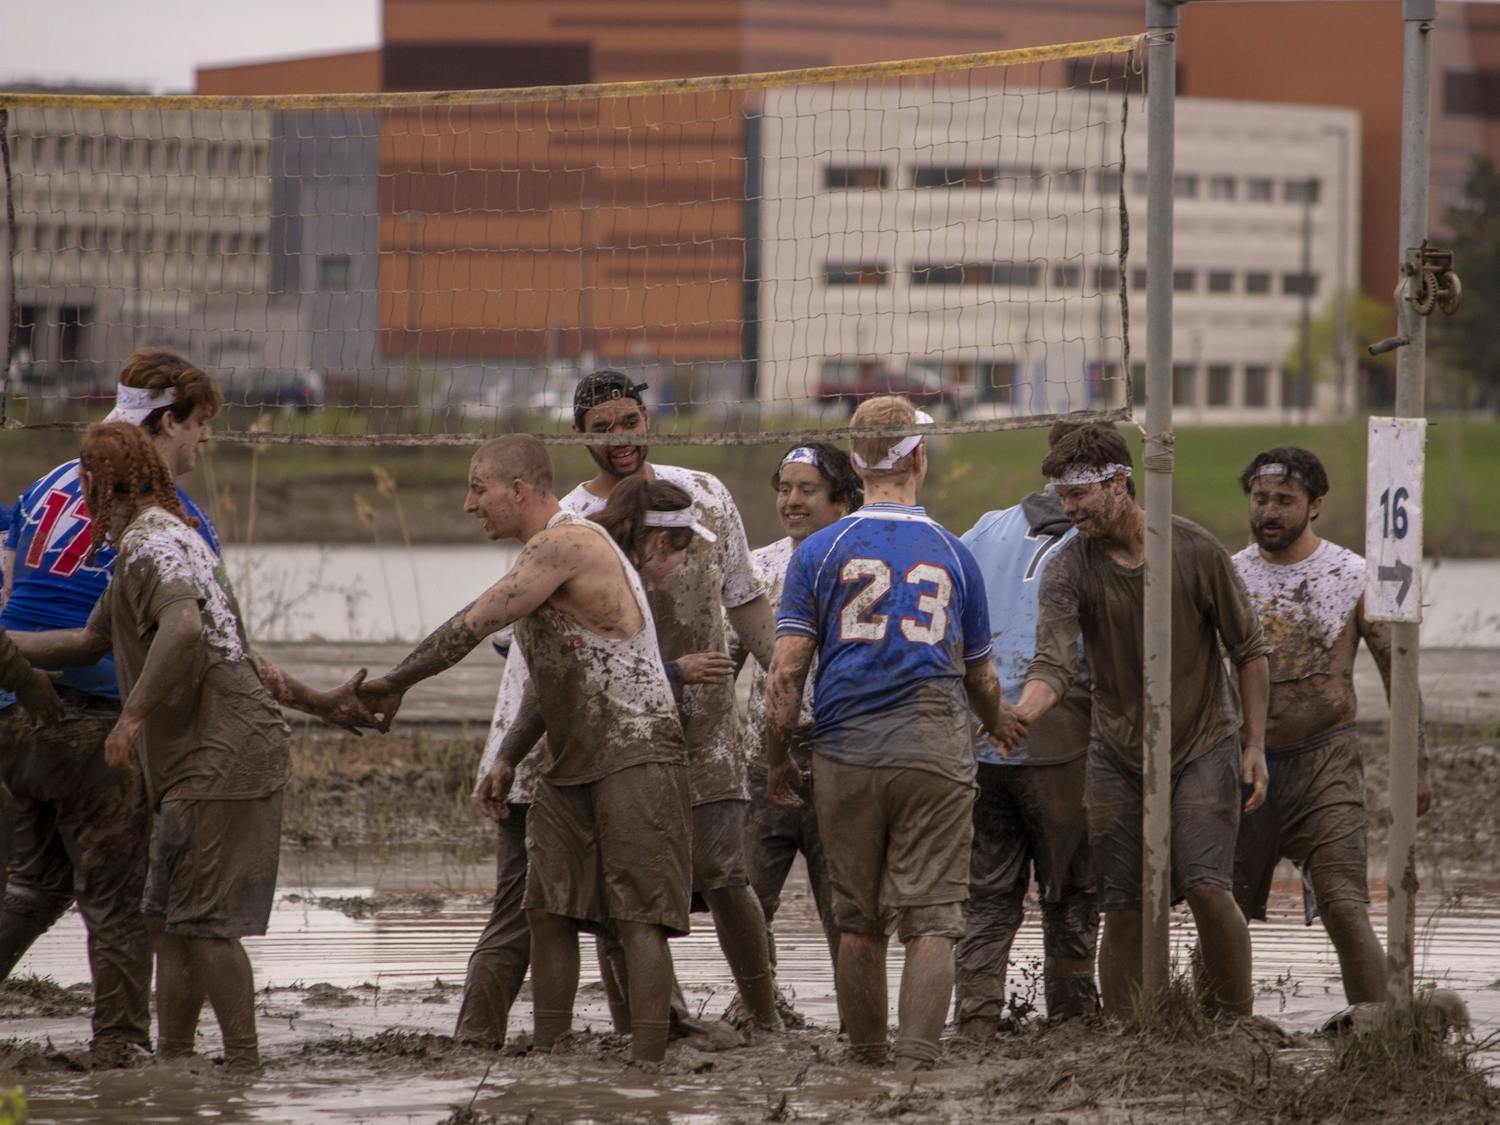 Students shake hands following a spirited game of mud volleyball during Oozefest 2019.